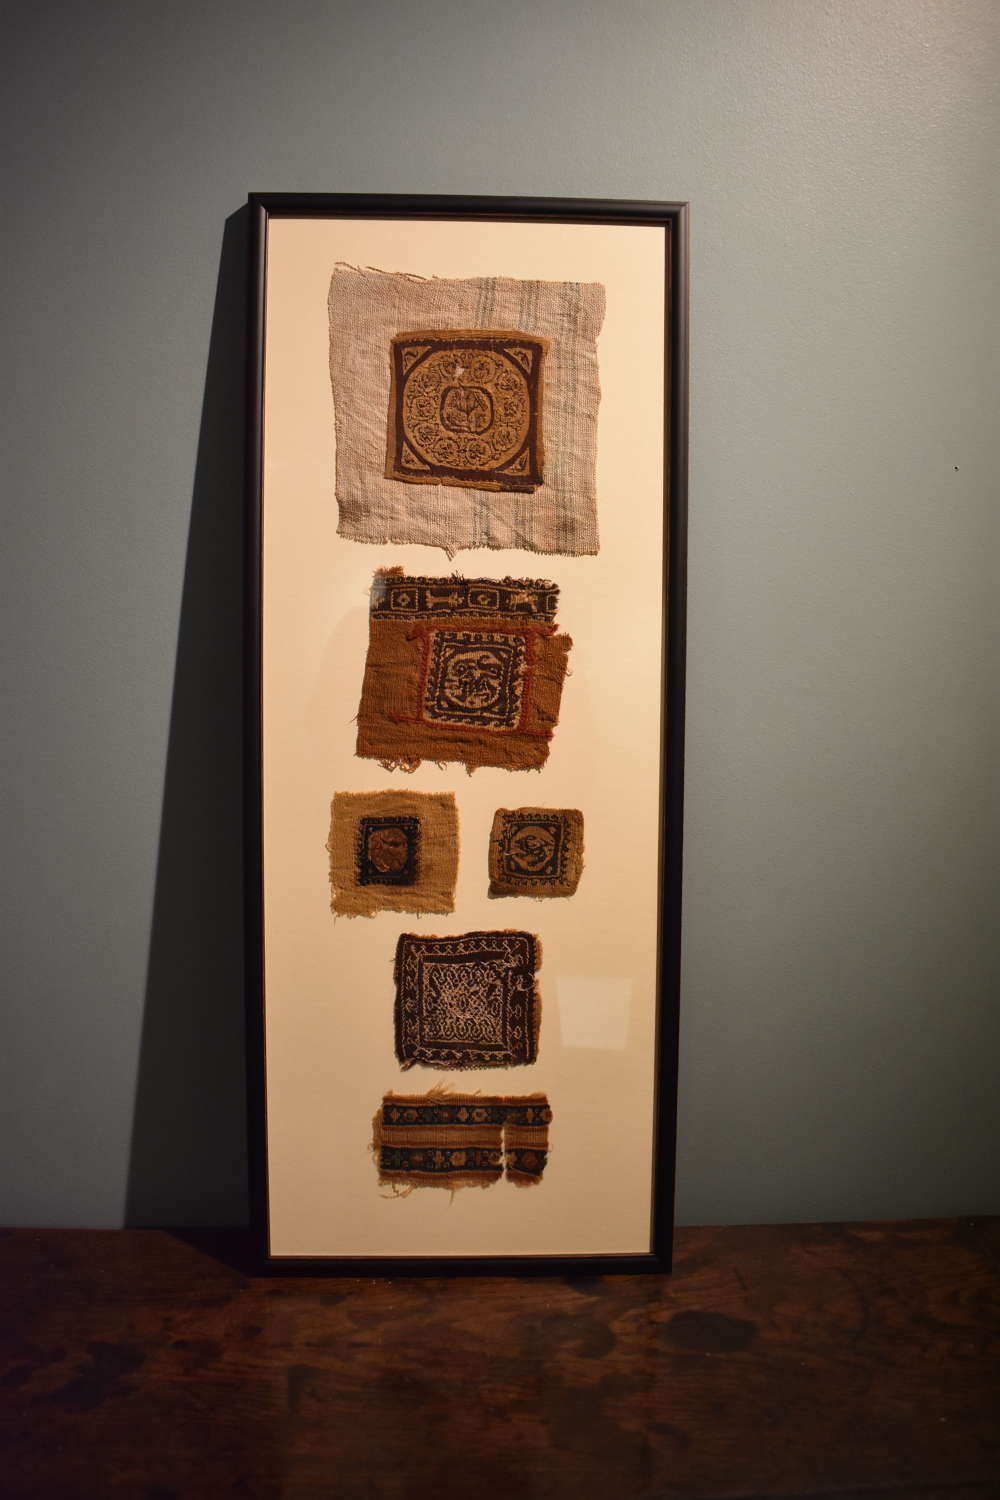 A group of 6 x 3rd-6th c. framed Coptic textile fragments